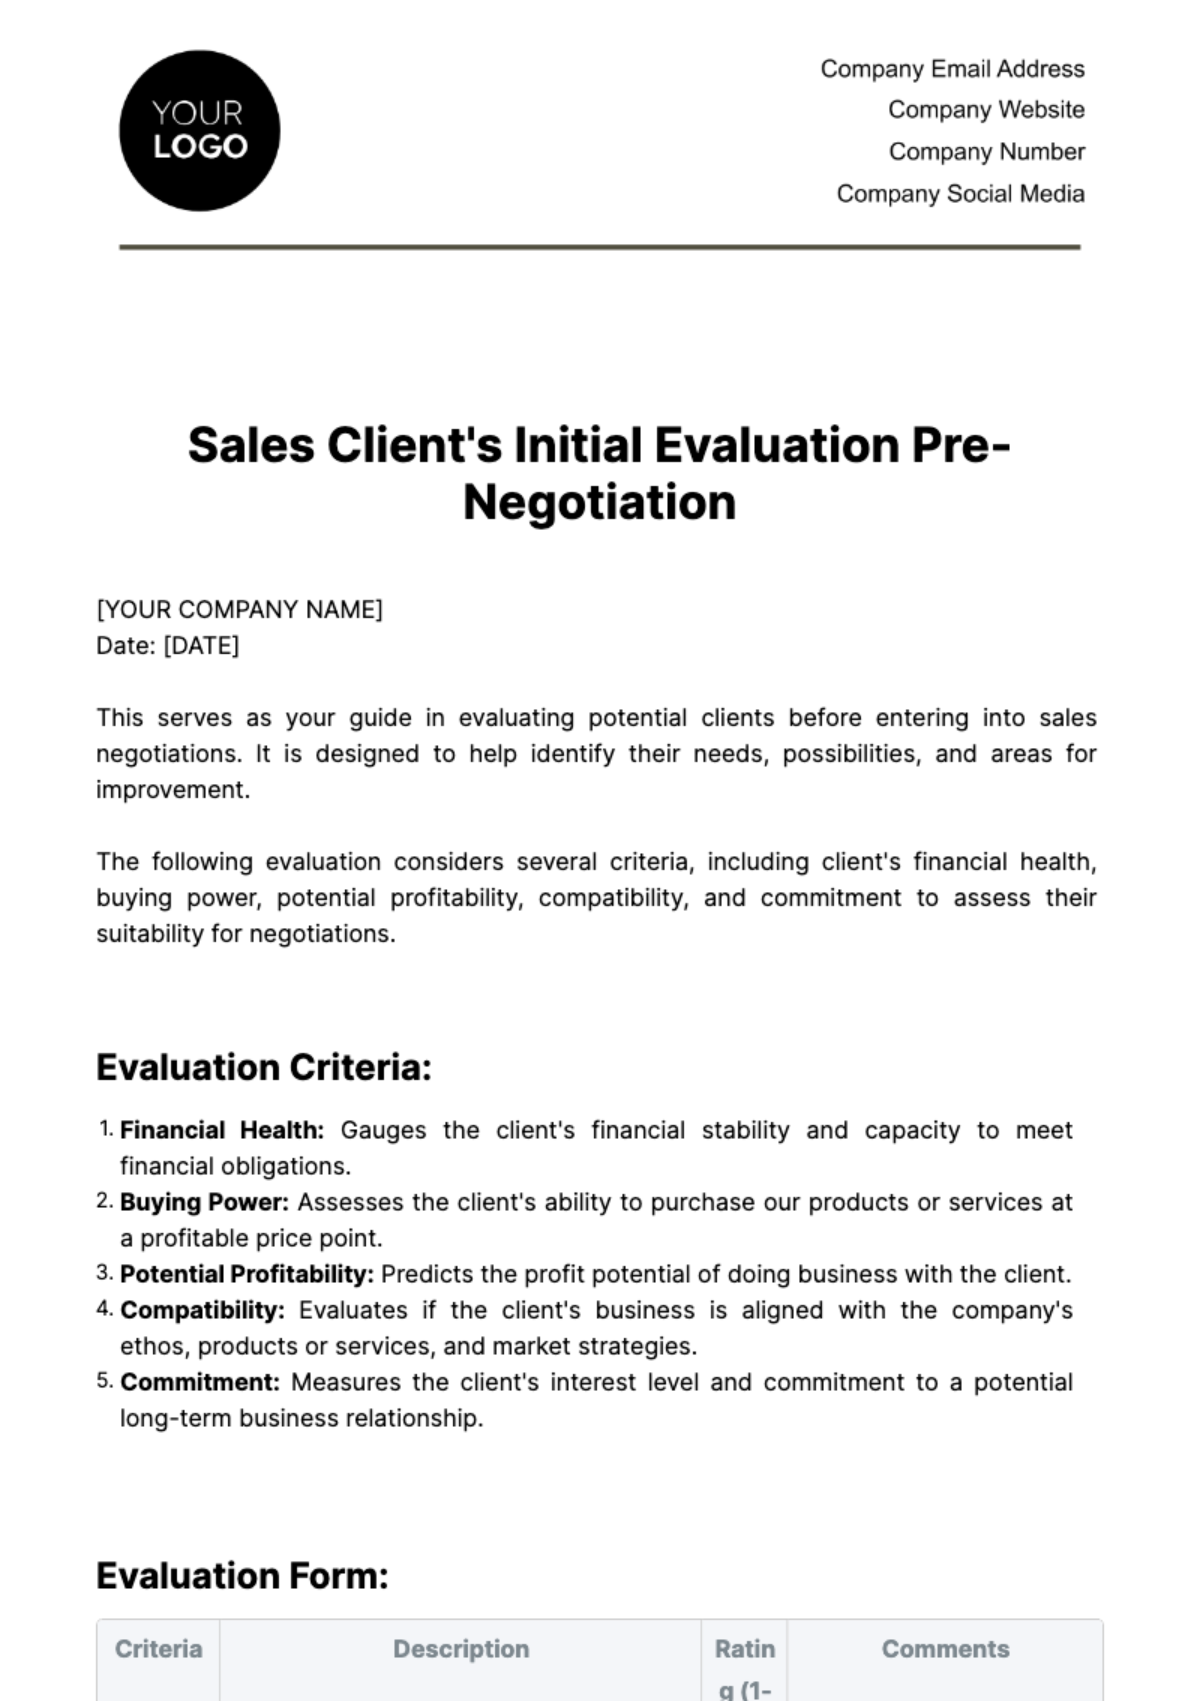 Free Sales Client's Initial Evaluation Pre-Negotiation Template